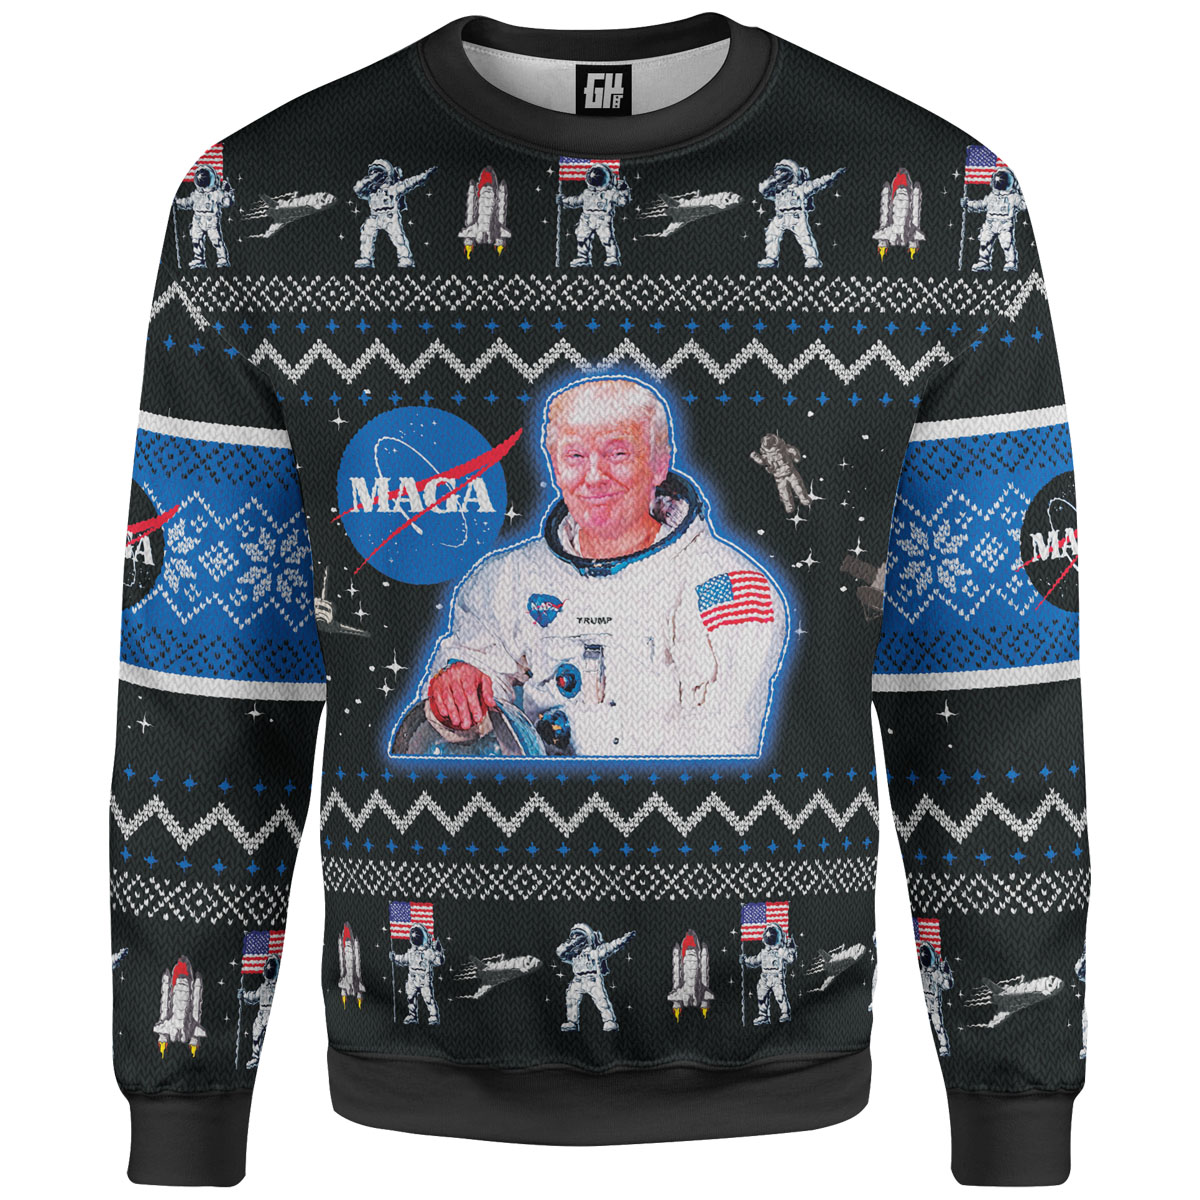 Maga Space Force Christmas Sweater